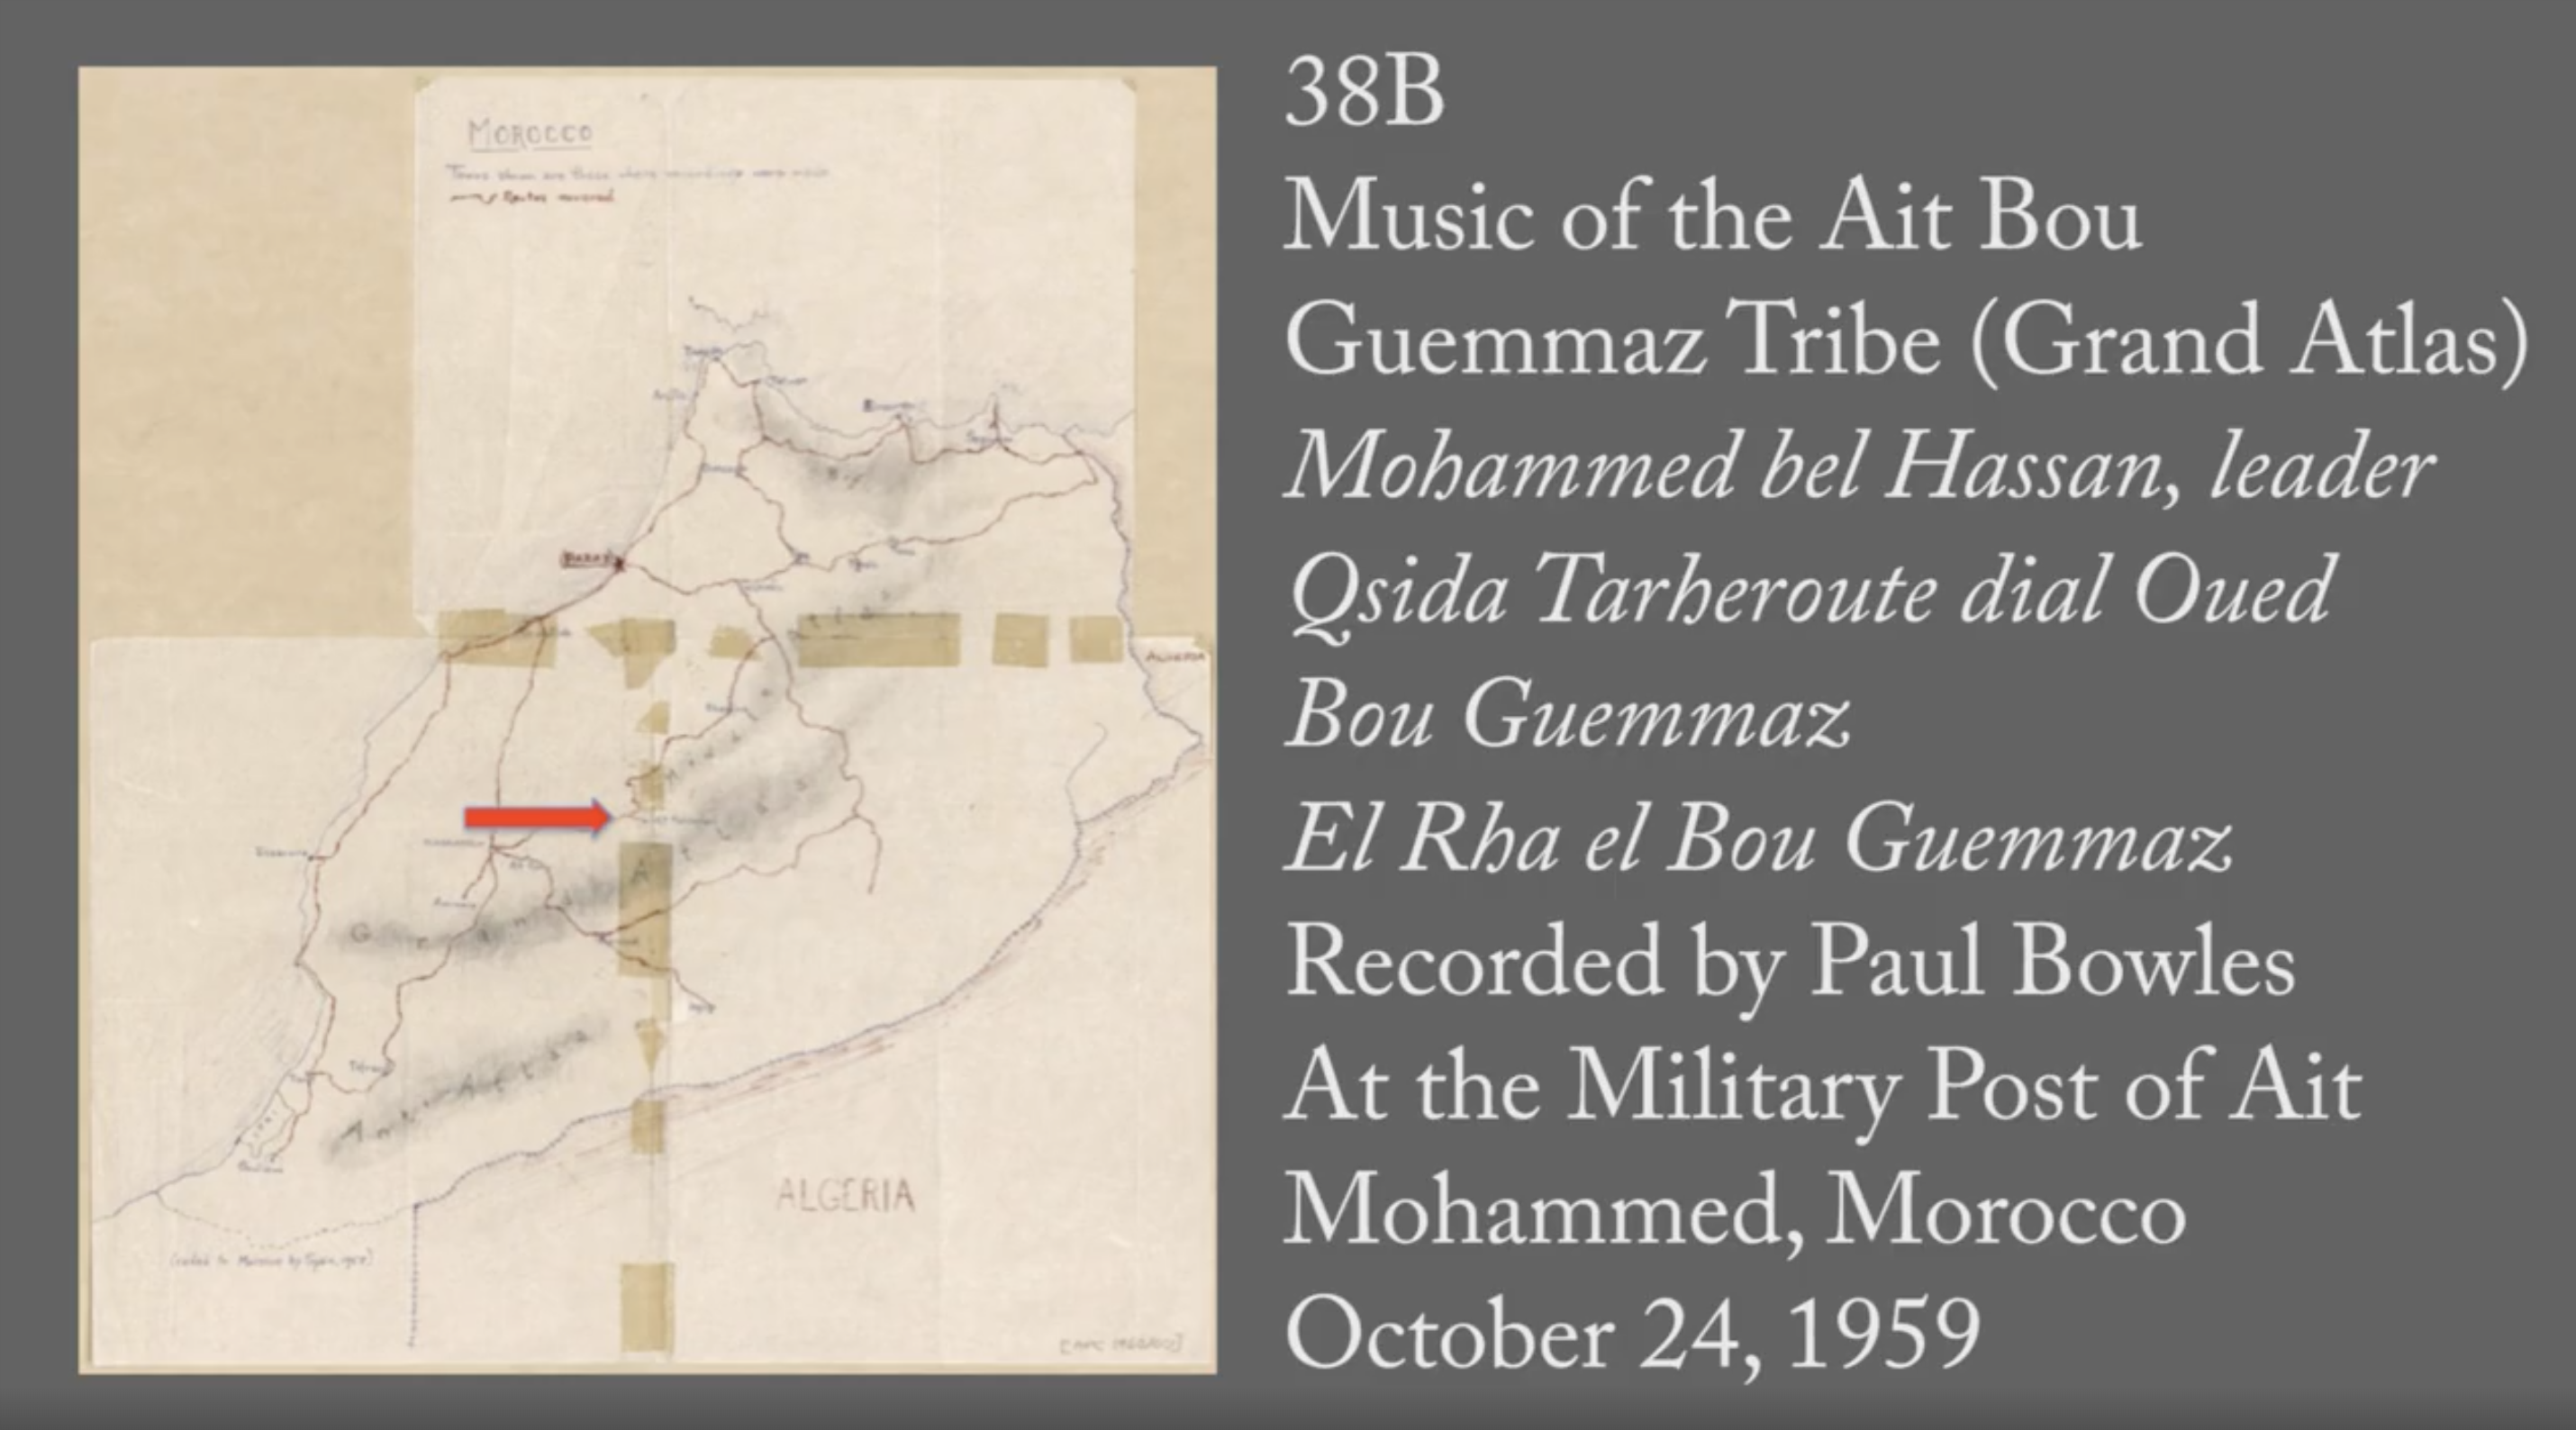 38B: "Qsida Tarheroute dial Oued" (Music of the Ait Bou Guemmaz Tribe)